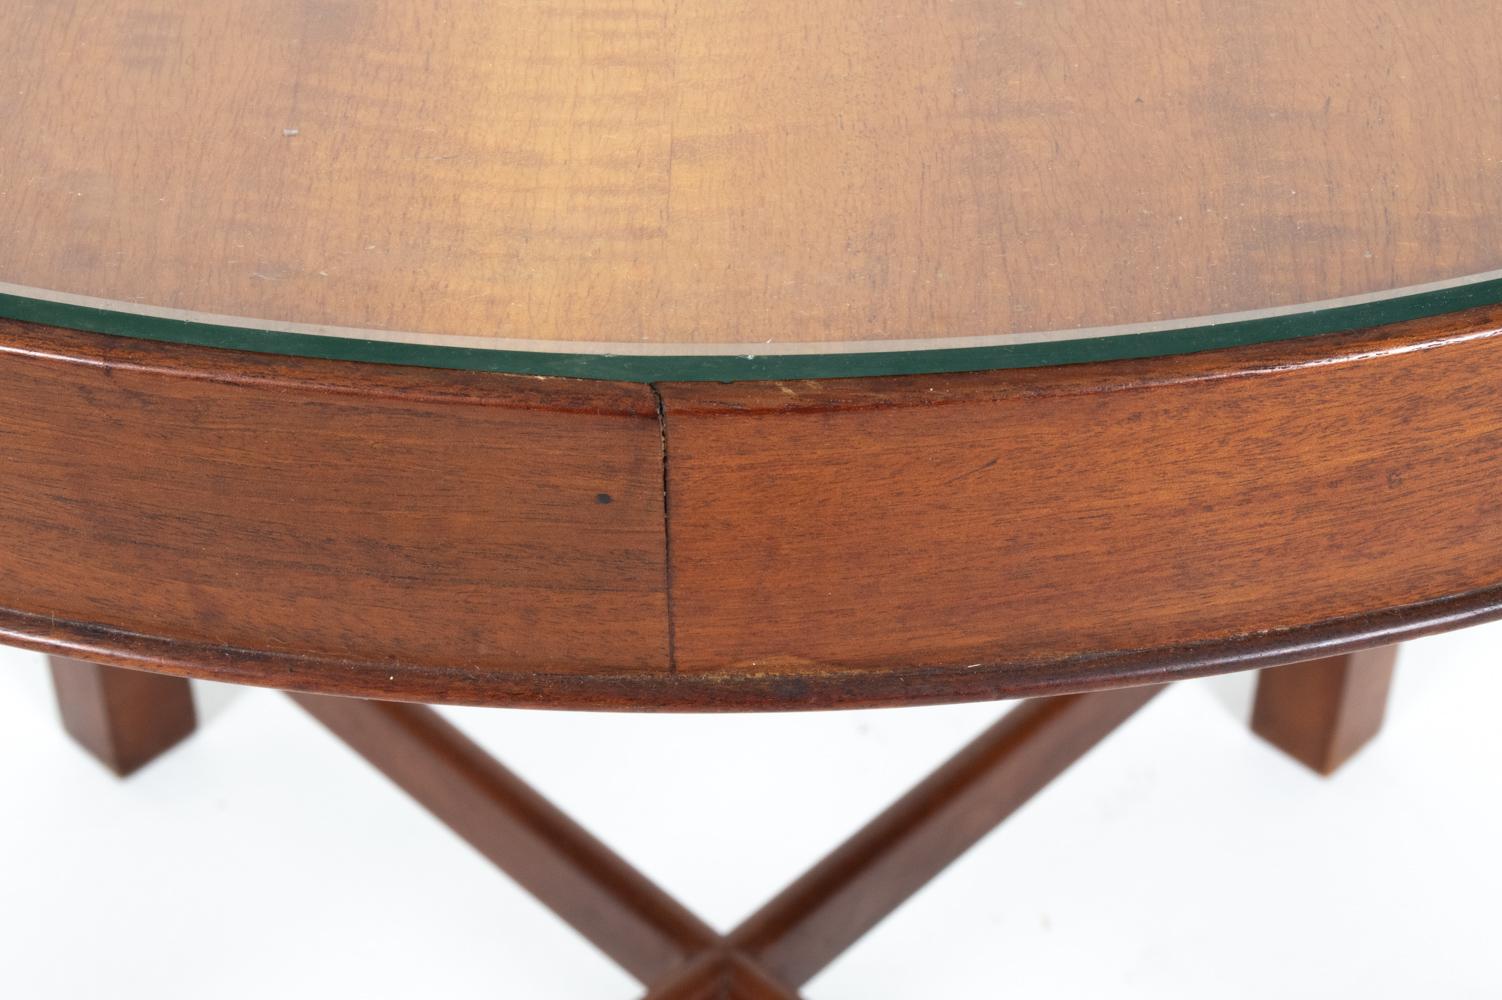 Frits Henningsen Danish Mahogany Round Side Table, c. 1940's For Sale 2